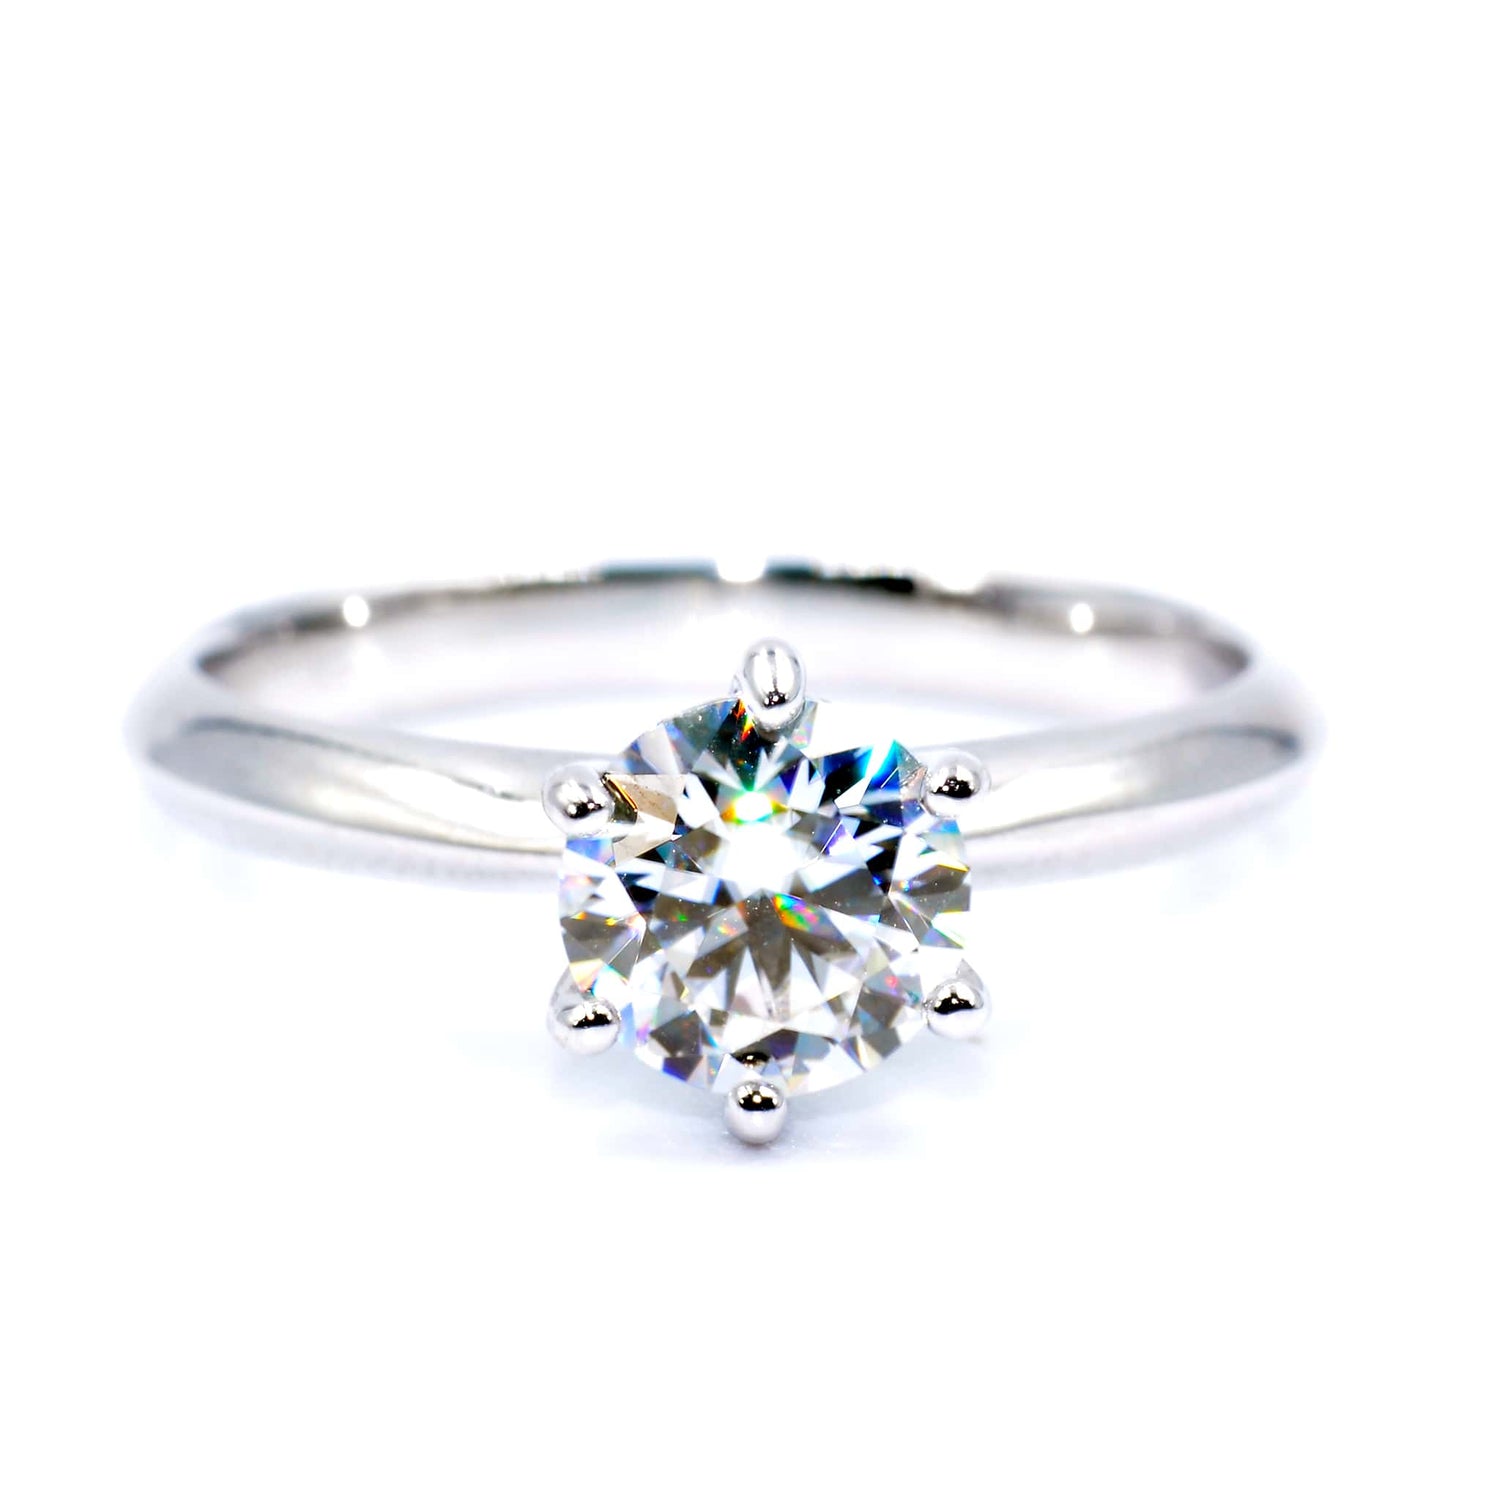 Selected handmade moissanite jewelry for engagement rings and anniversary. Design your own jewelry with us.